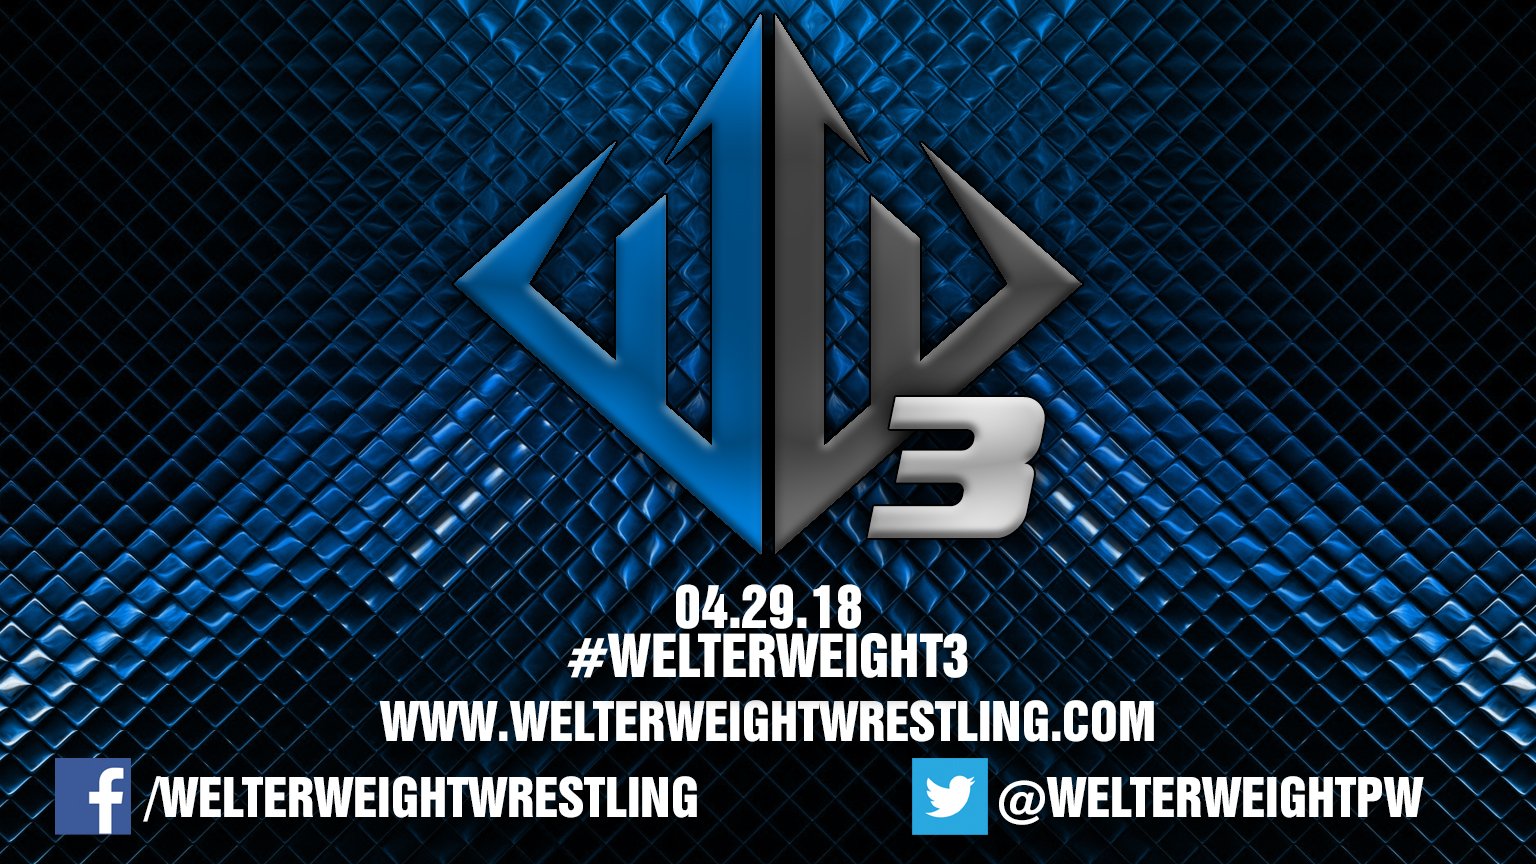 Welterweight Wrestling Weekly #1: What Is Welterweight Wrestling?, Confirmed WW3 Stars (Photos), Ace Perry v Nate Wings (Full Match), More